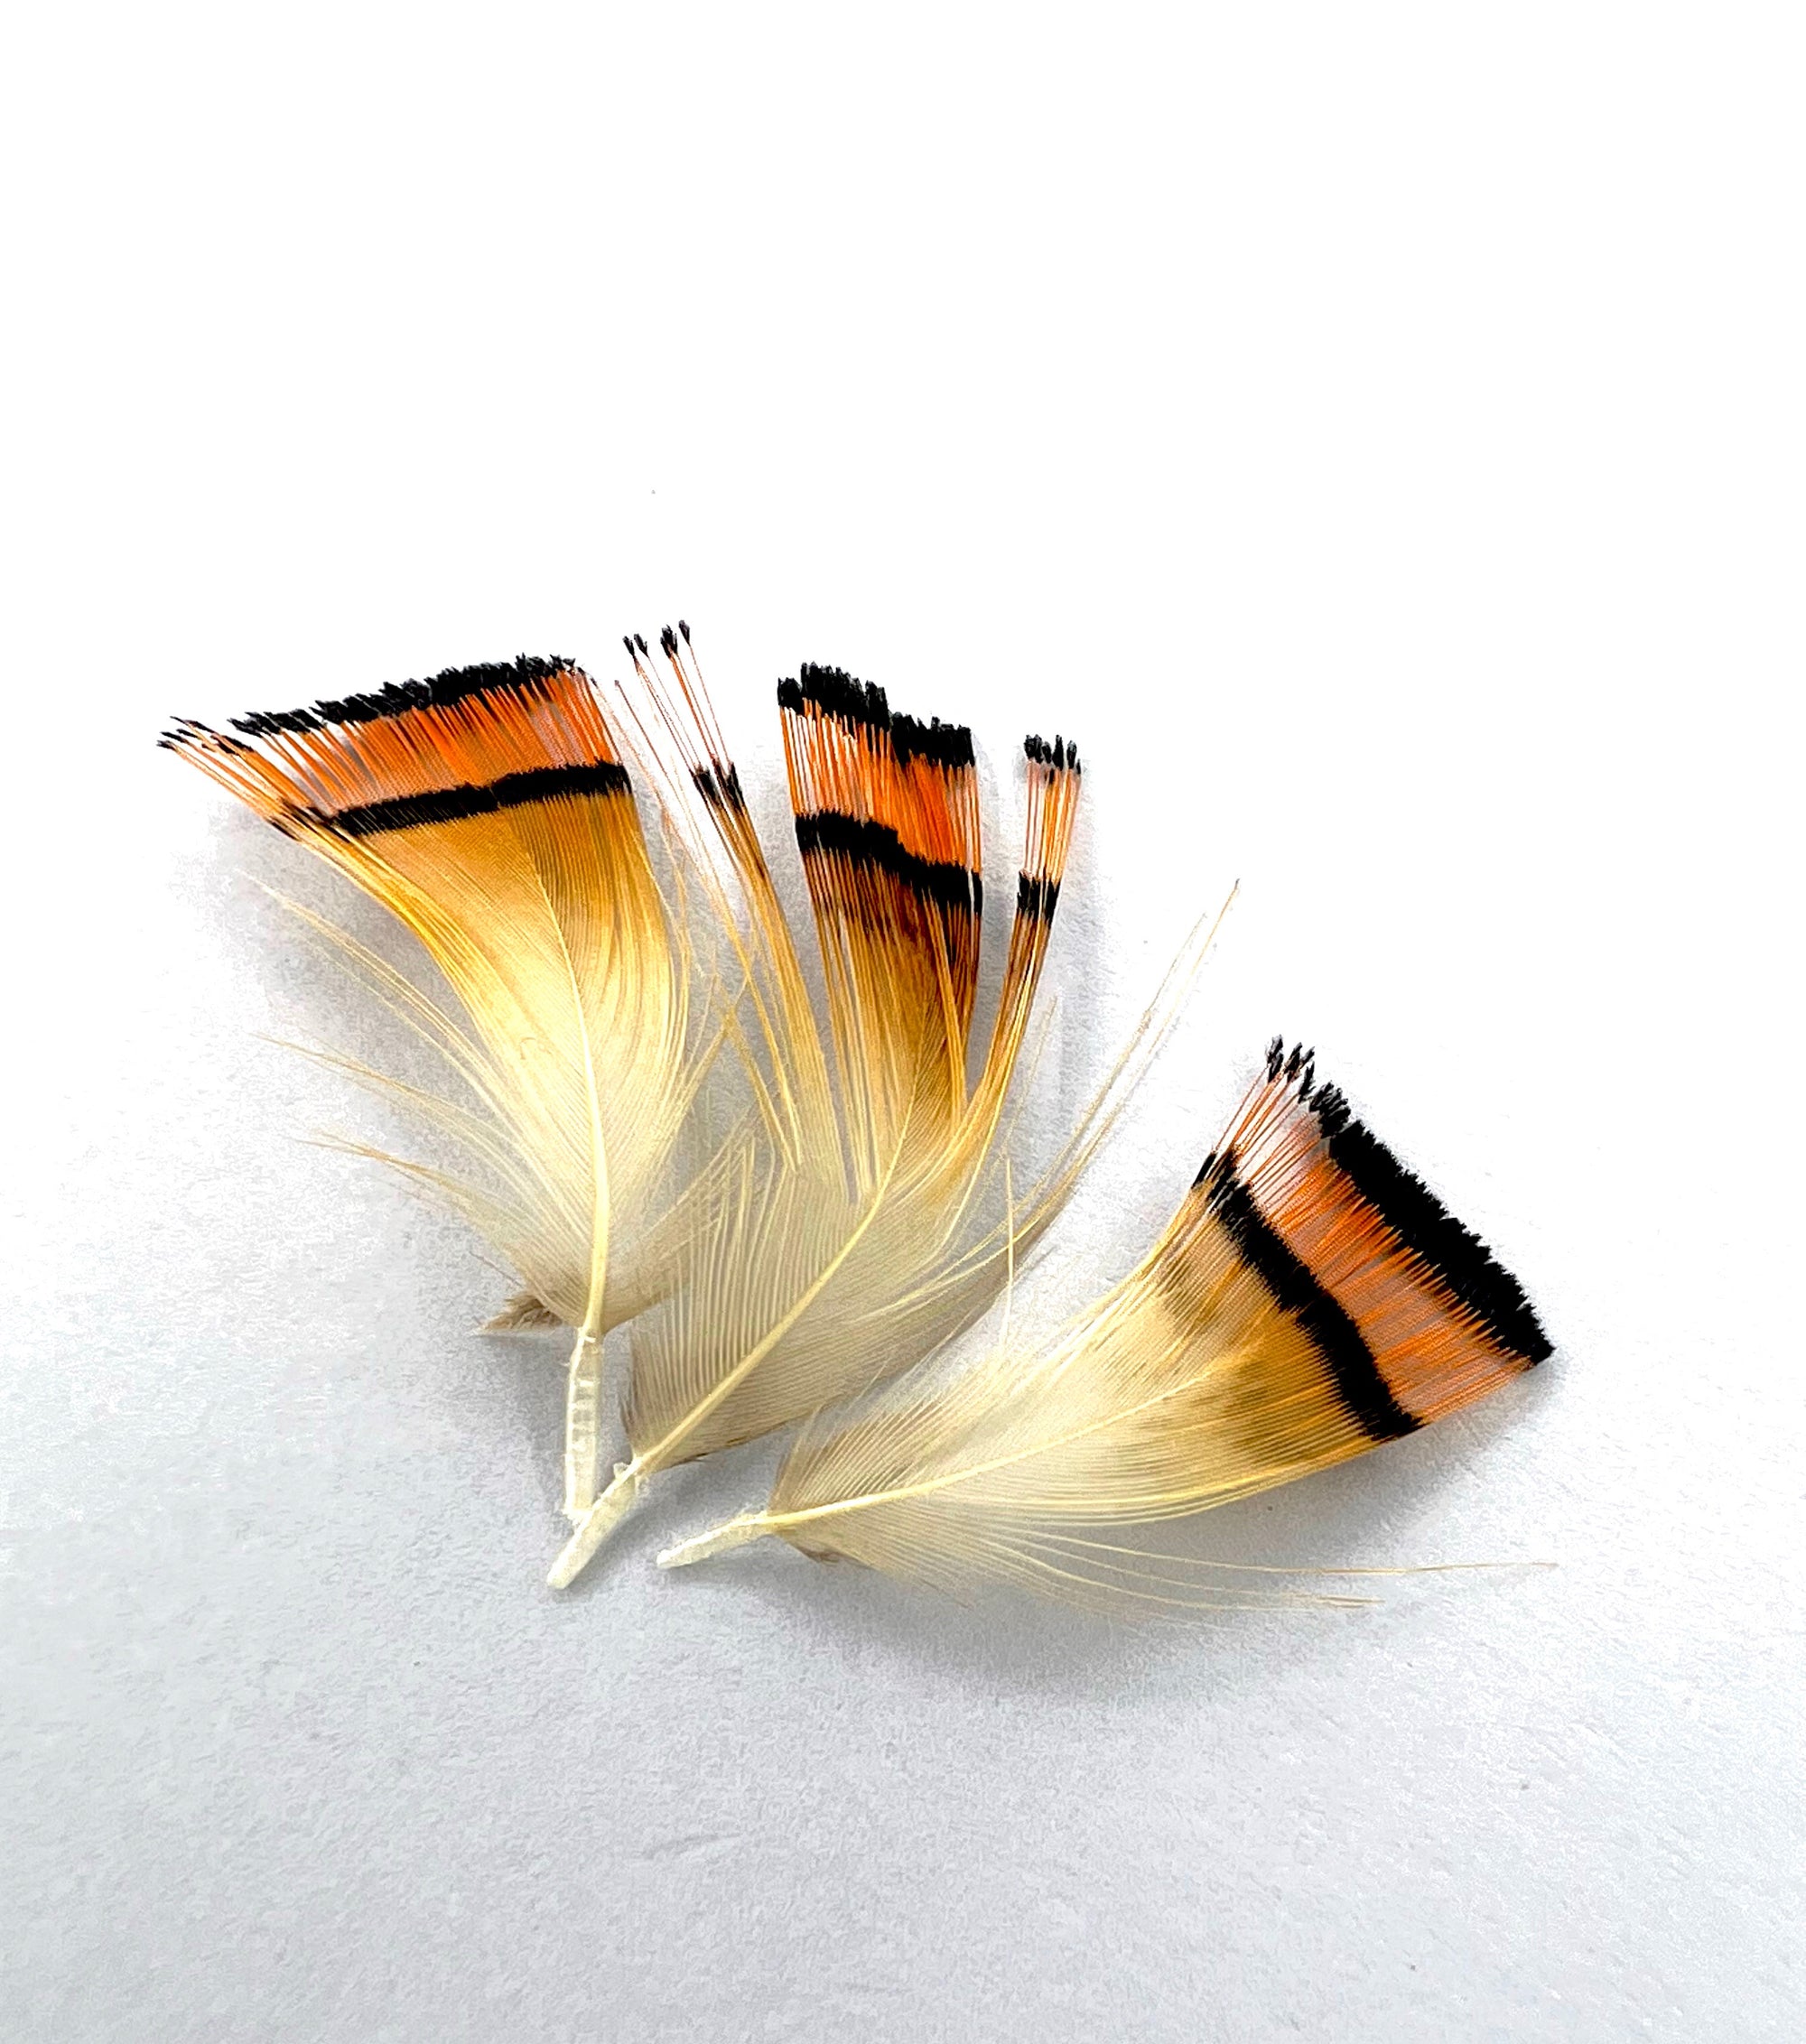 Hareline Wooly Bugger Marabou Feathers Fly Tying Materials Assorted Colors